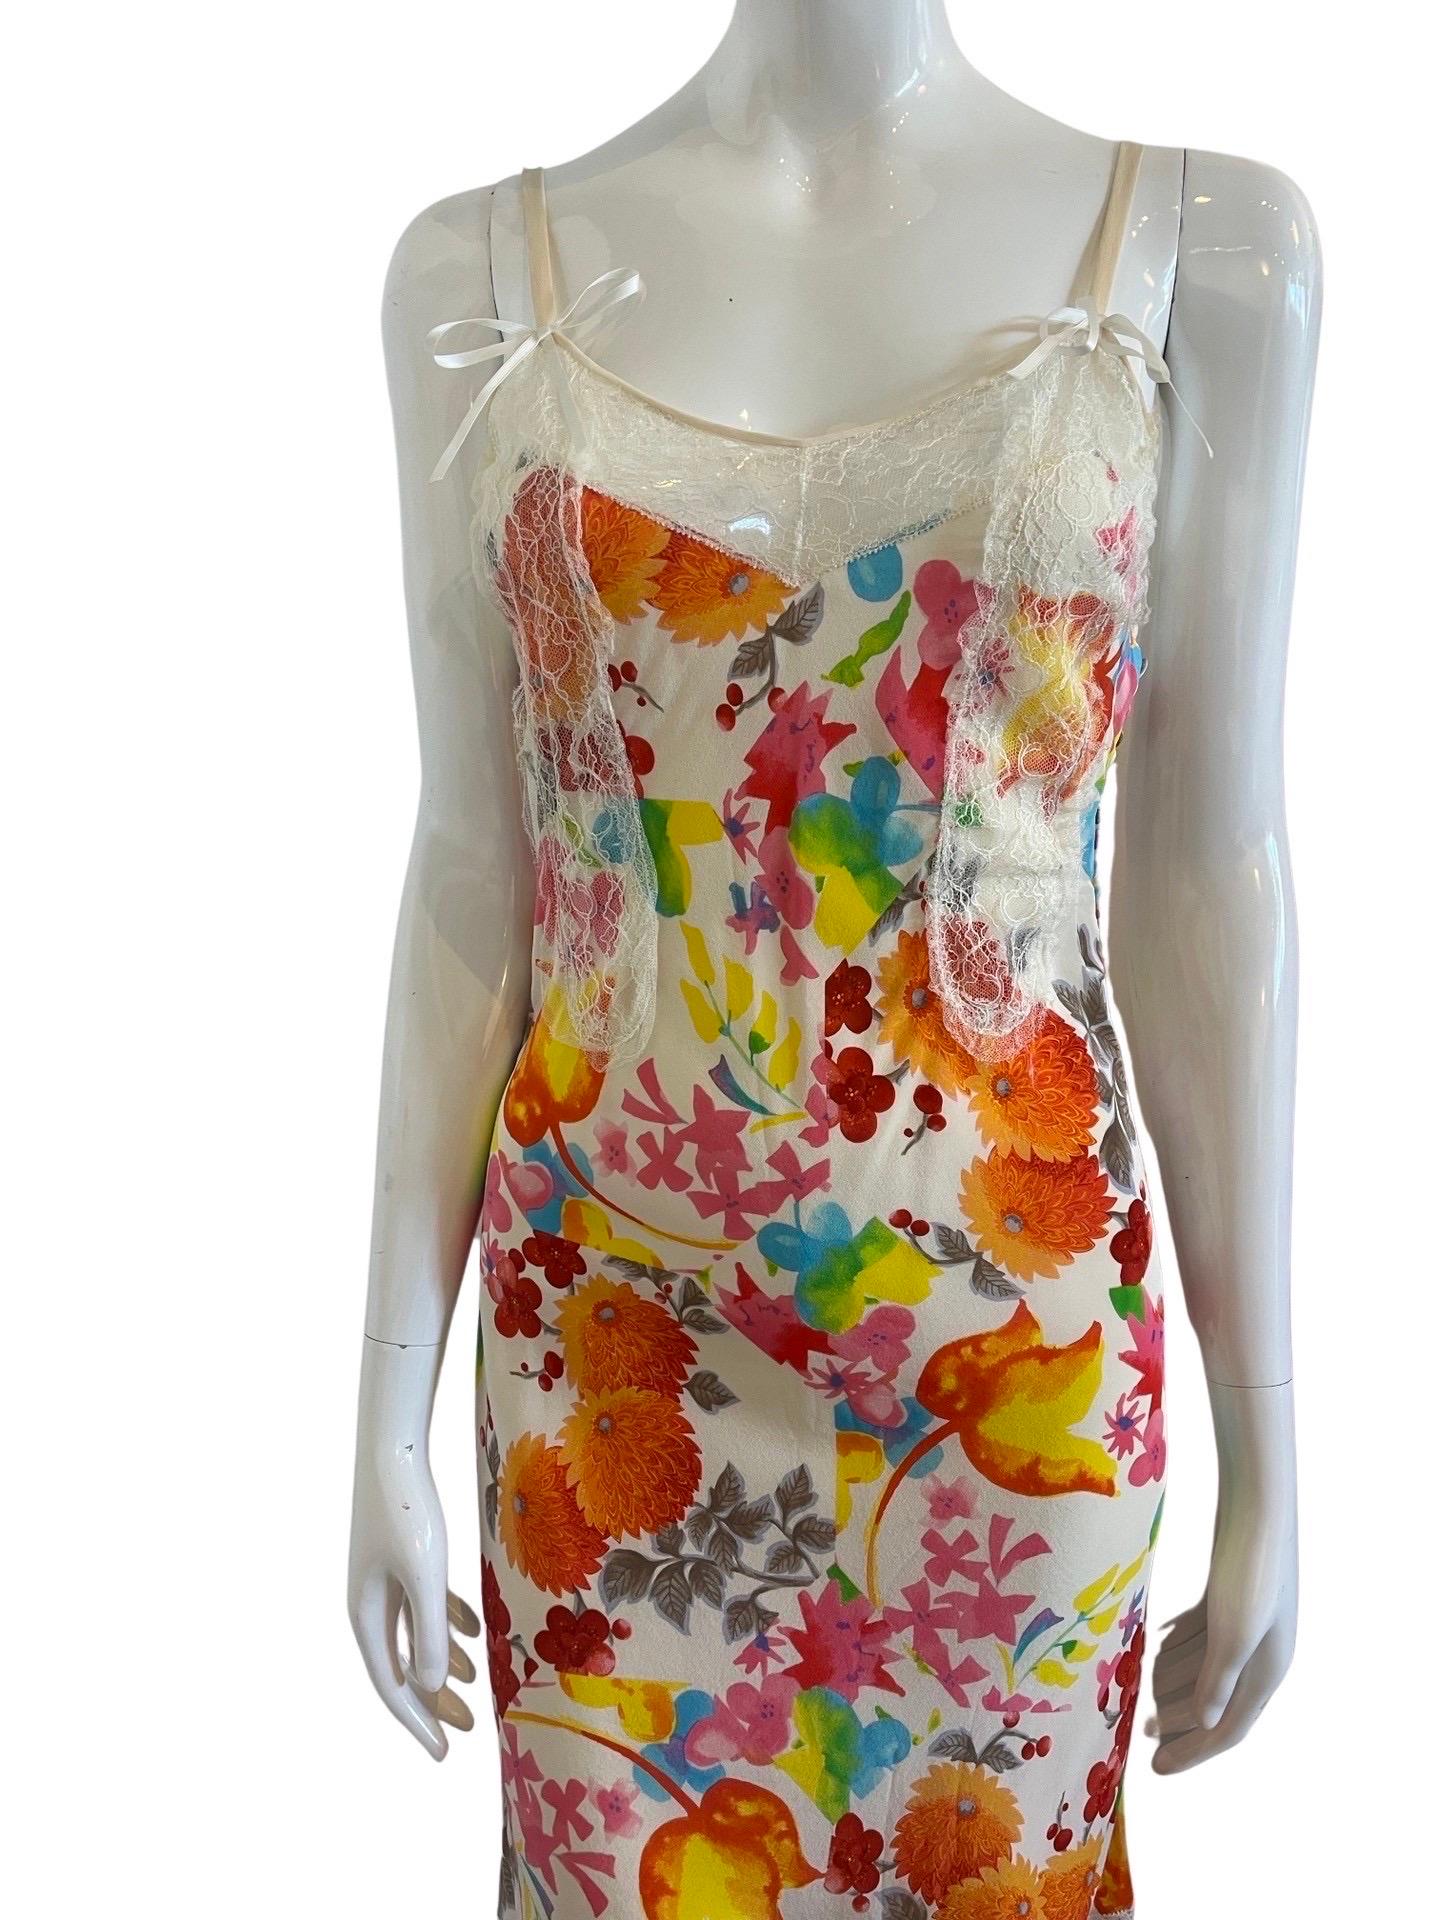 Stunning Christian Dior by John Galliano dress from an early 00's collection.  This is a mid-length slip dress done in silk with lace detailing in silk printed acid bright color chrysanthemum and floral print.  In classic Galliano design, this dress